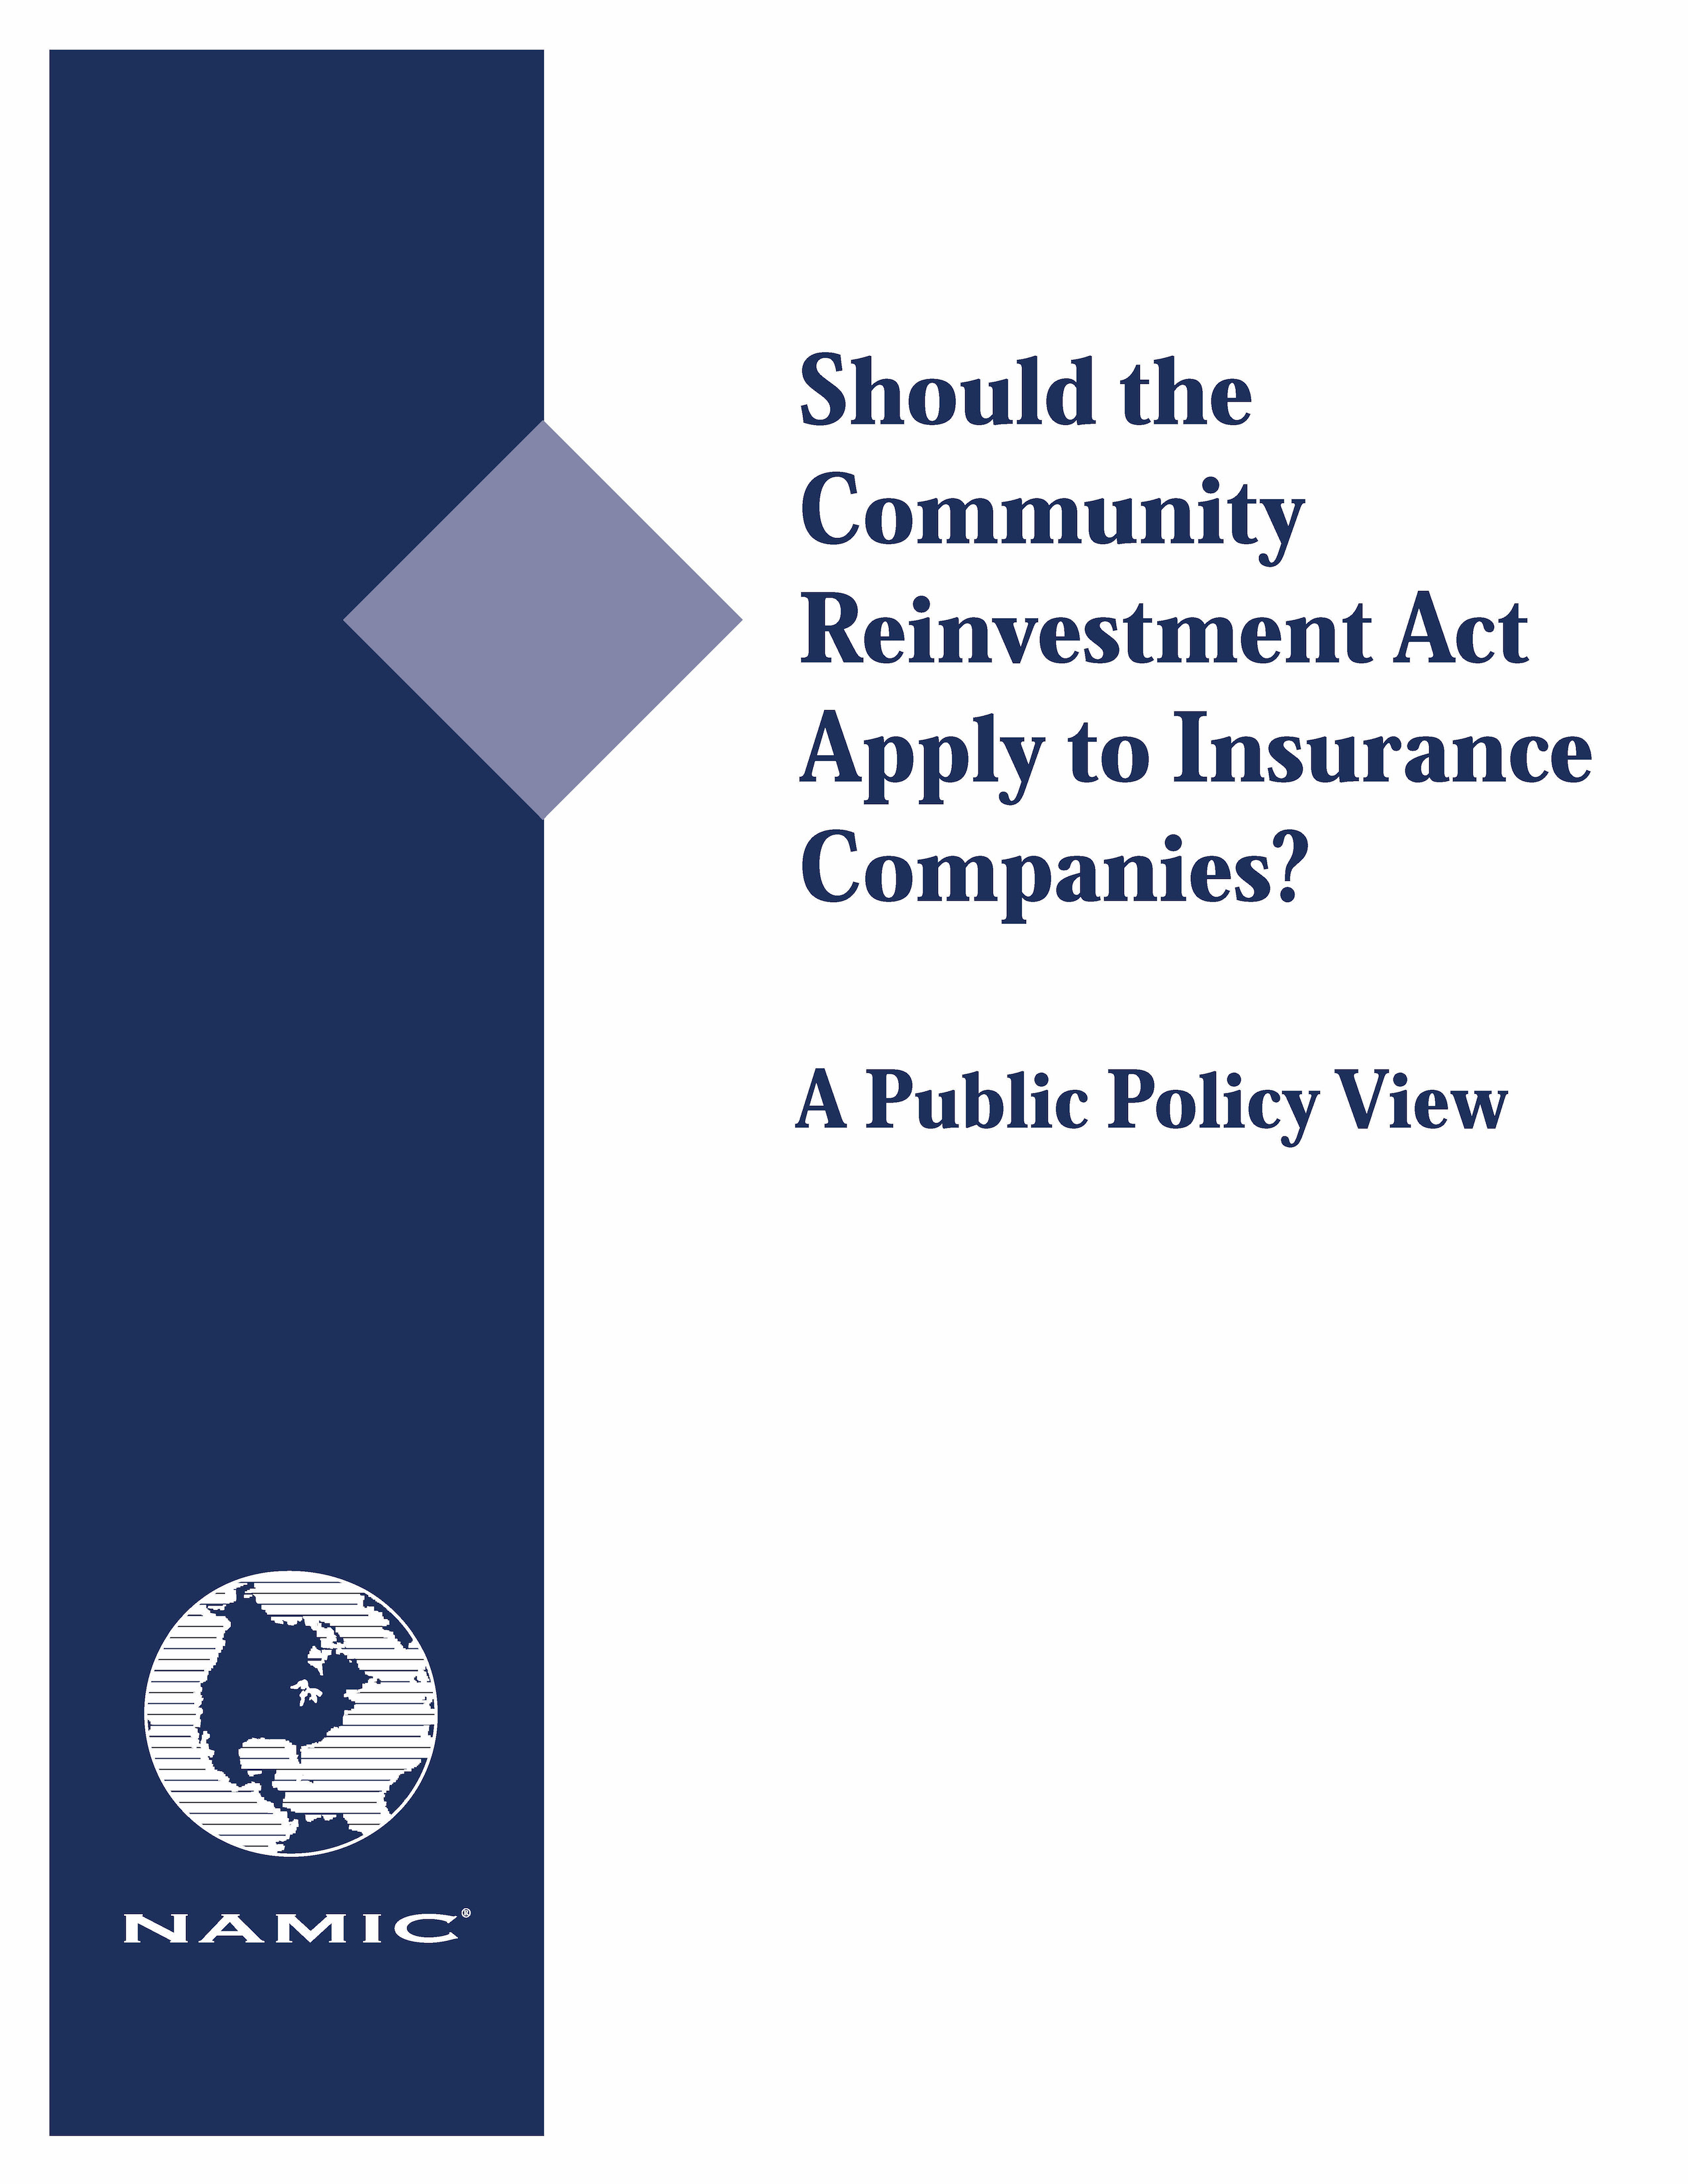 Should the Community Reinvestment Act Apply to Insurance Companies? PDF